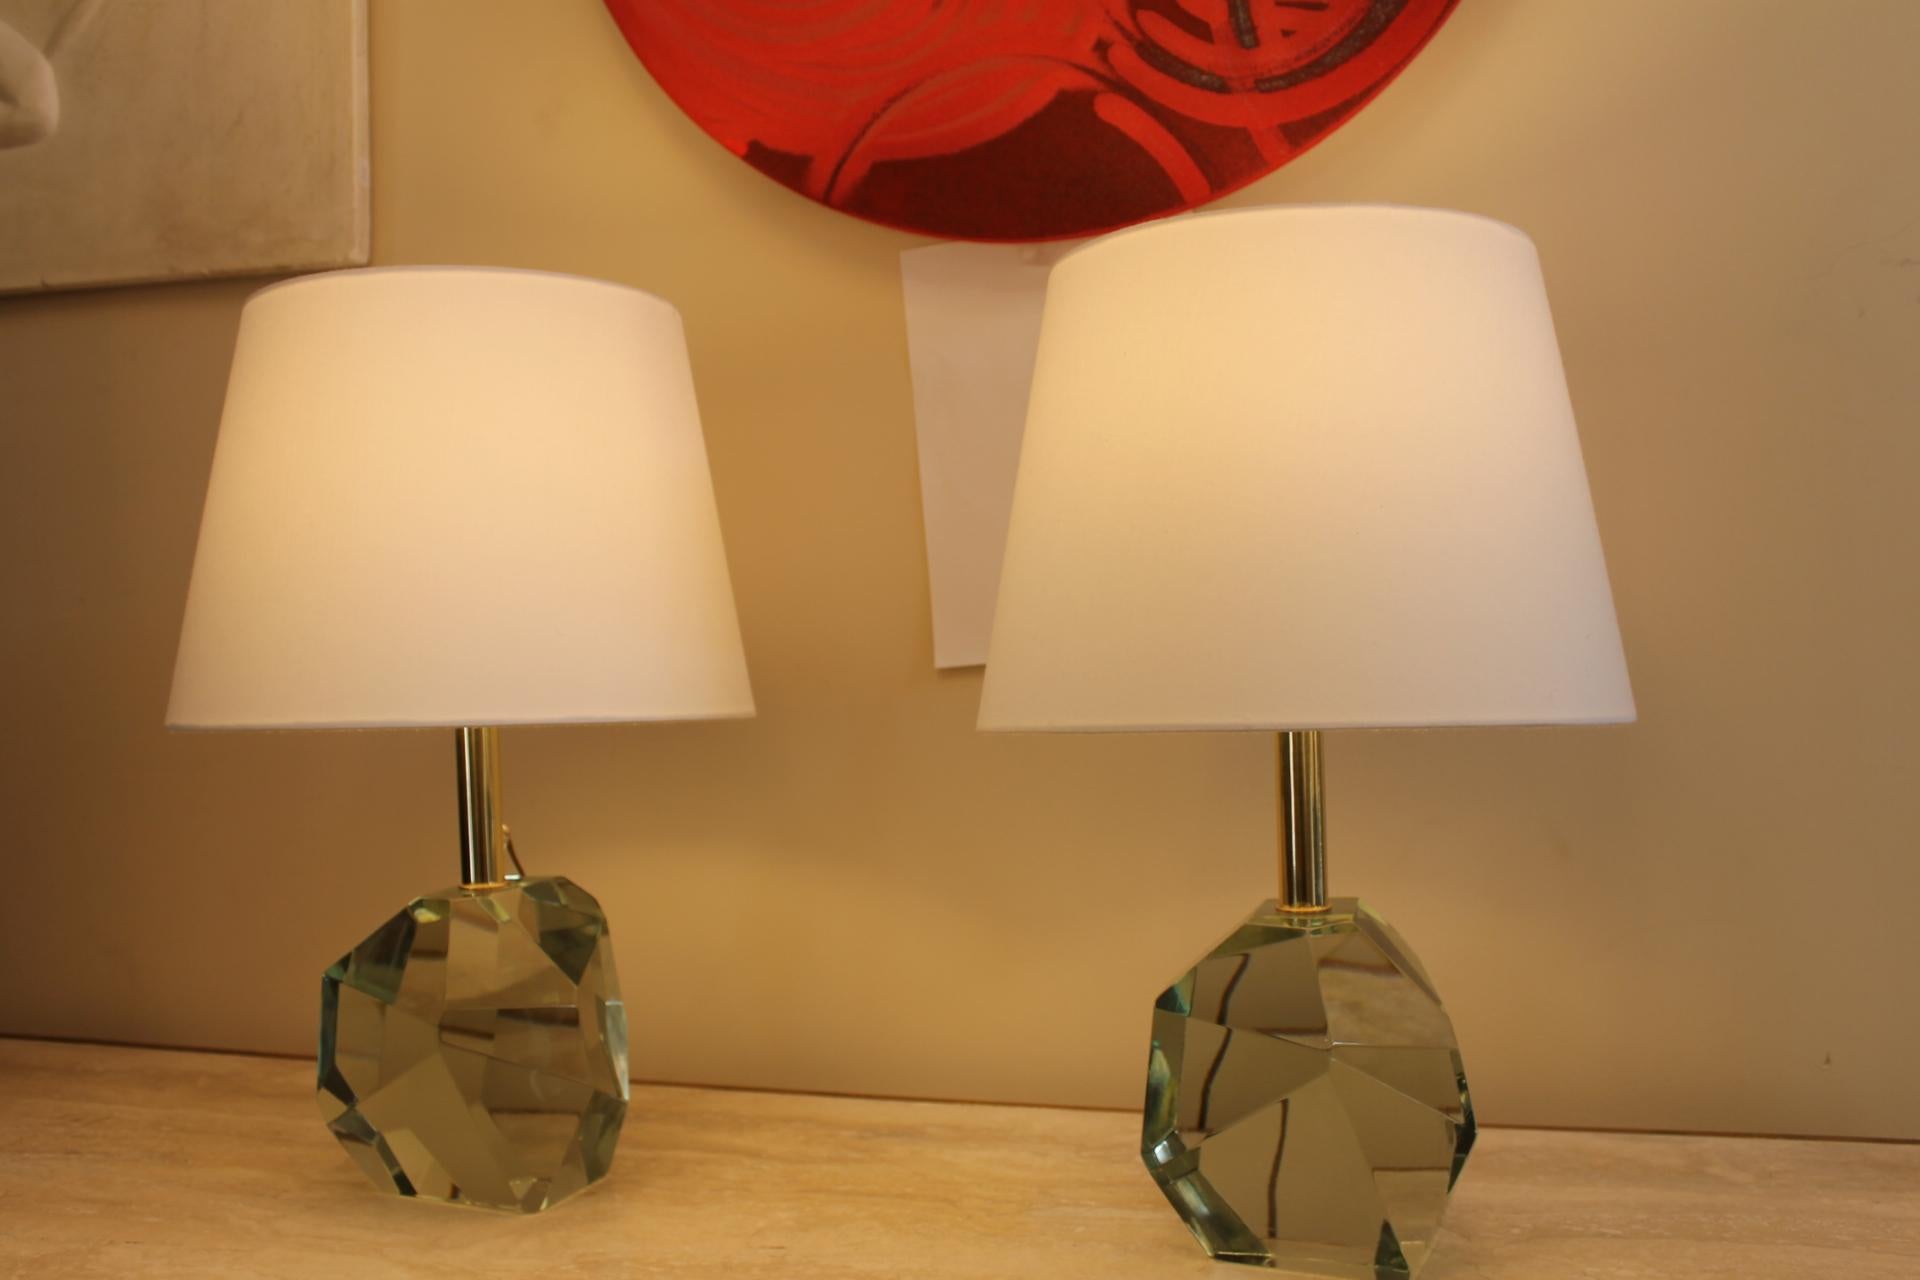 Pair of Lamps, Murano Glass, Pebbles, 20th For Sale 9